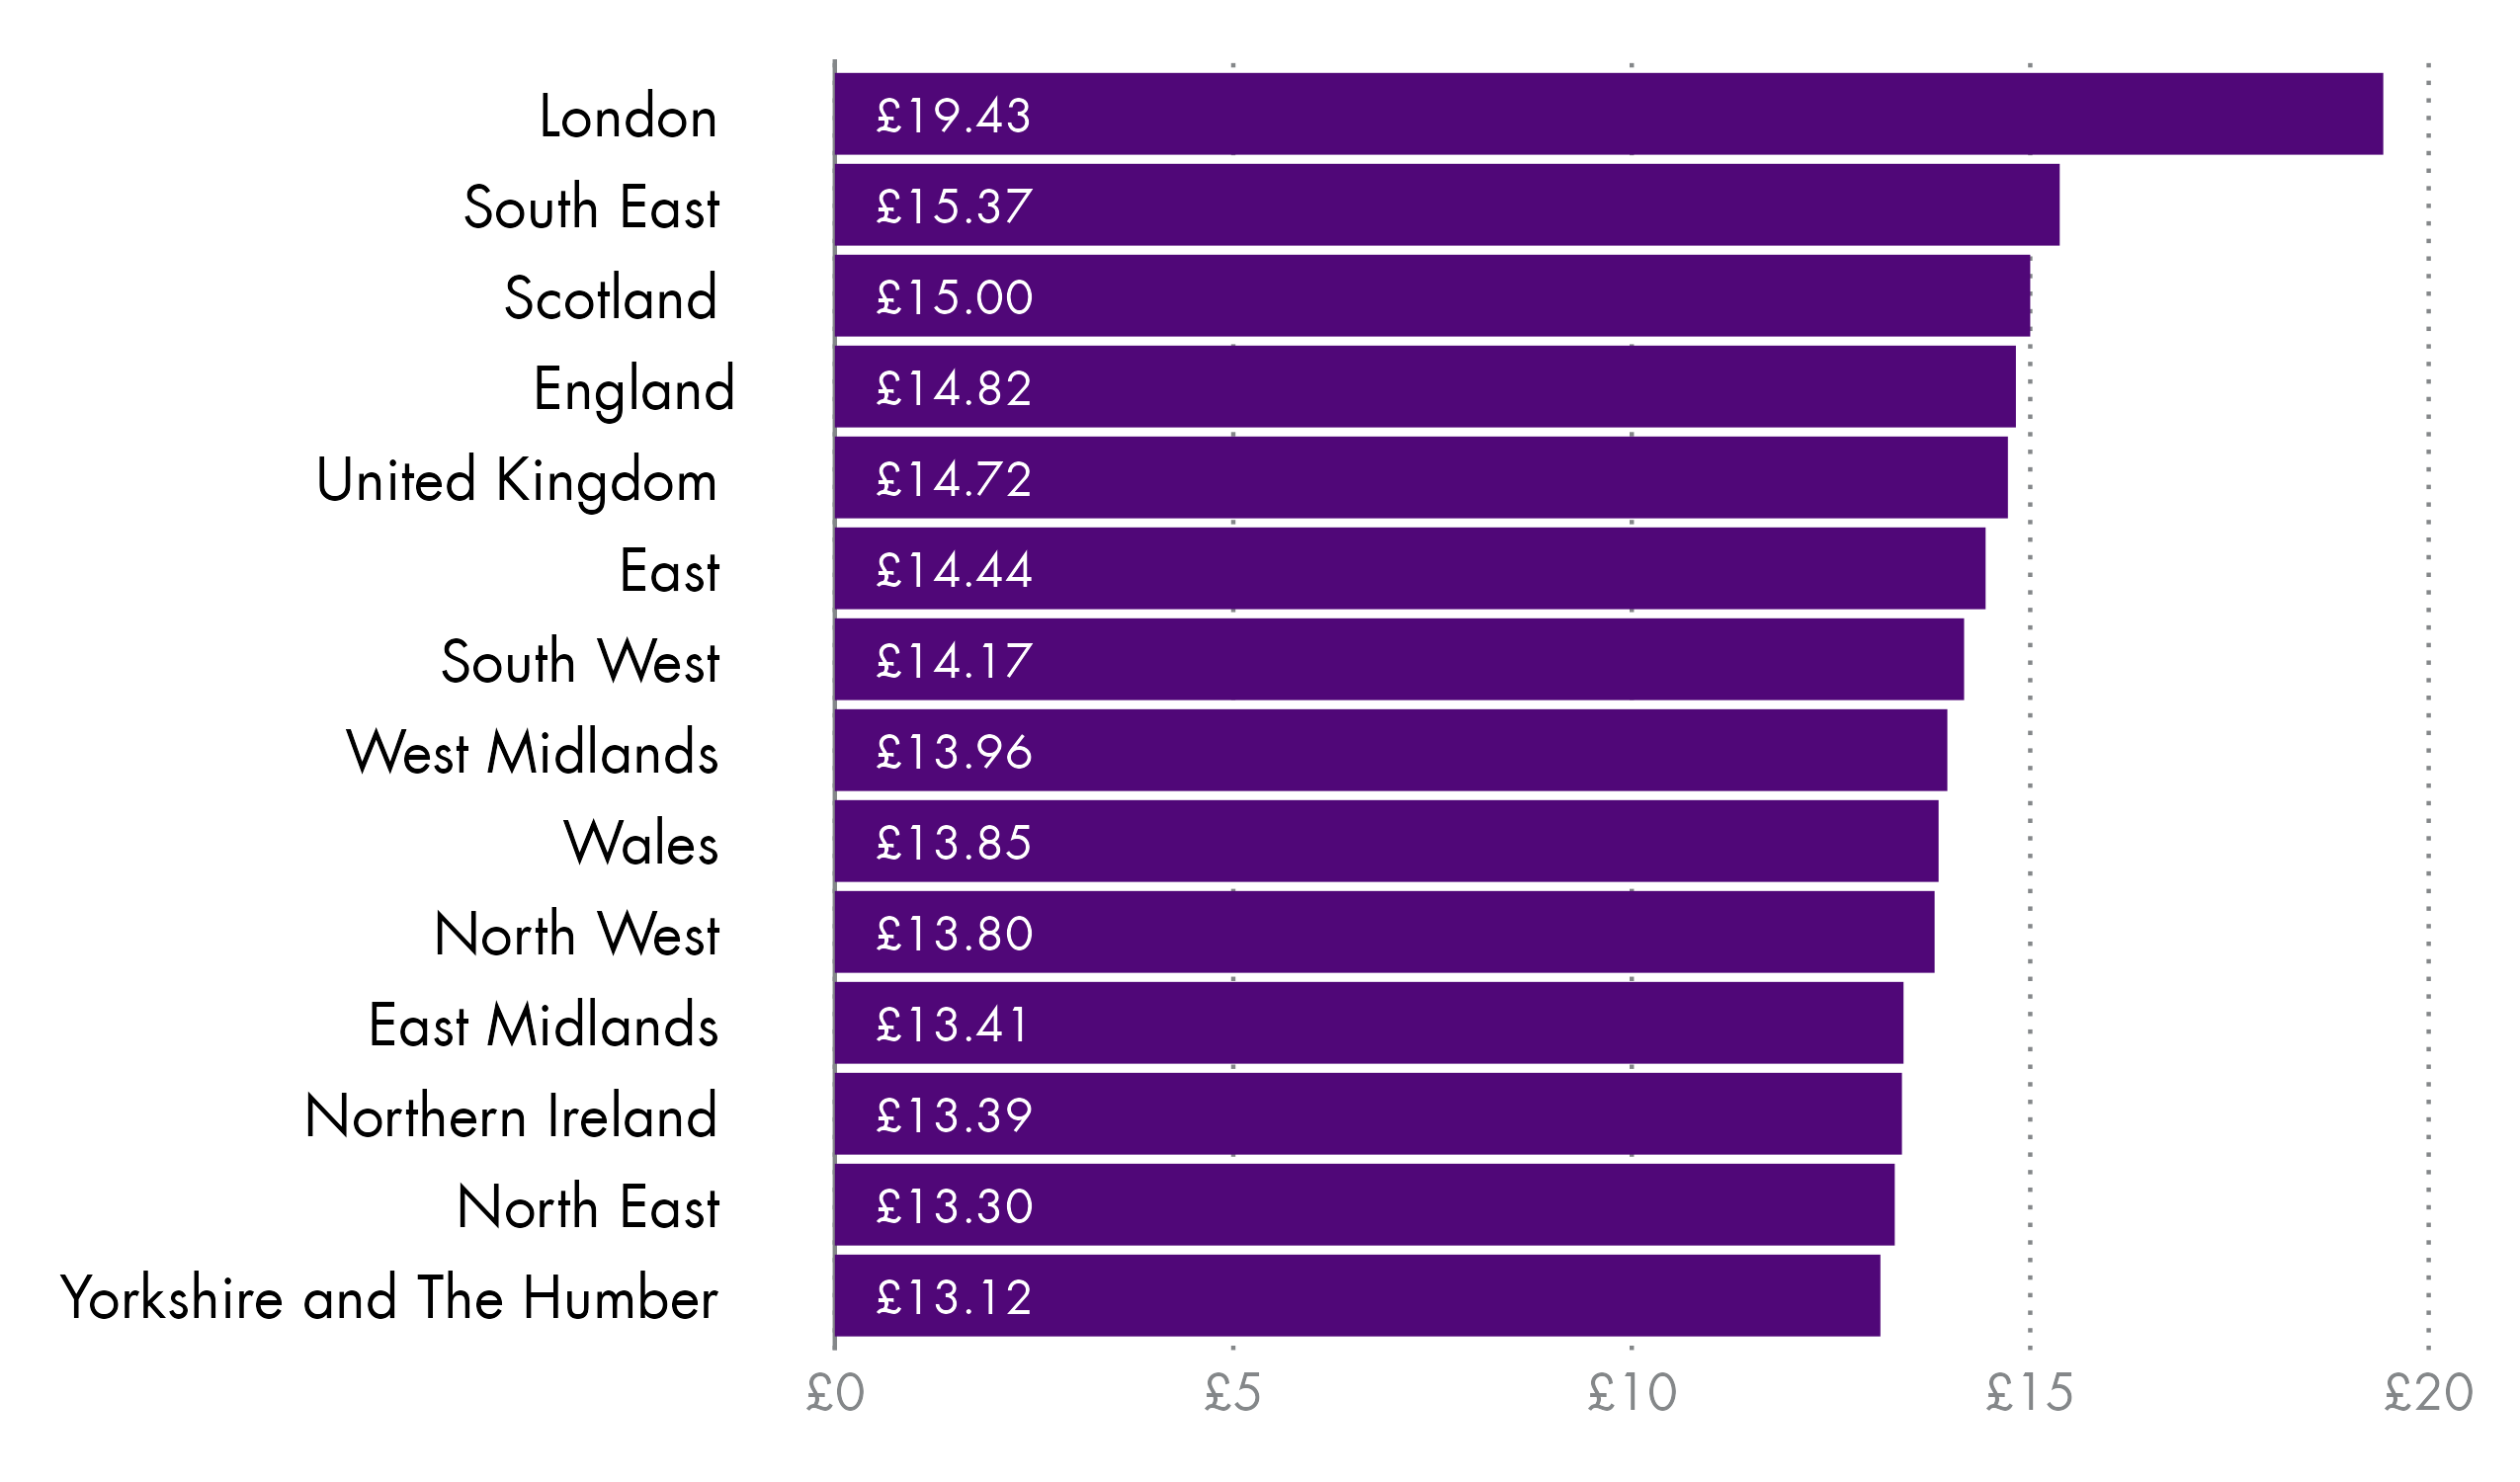 A horizontal bar chart showing the median hourly pay excluding overtime pay for all employees by nations and regions of the UK ranked from highest to lowest.